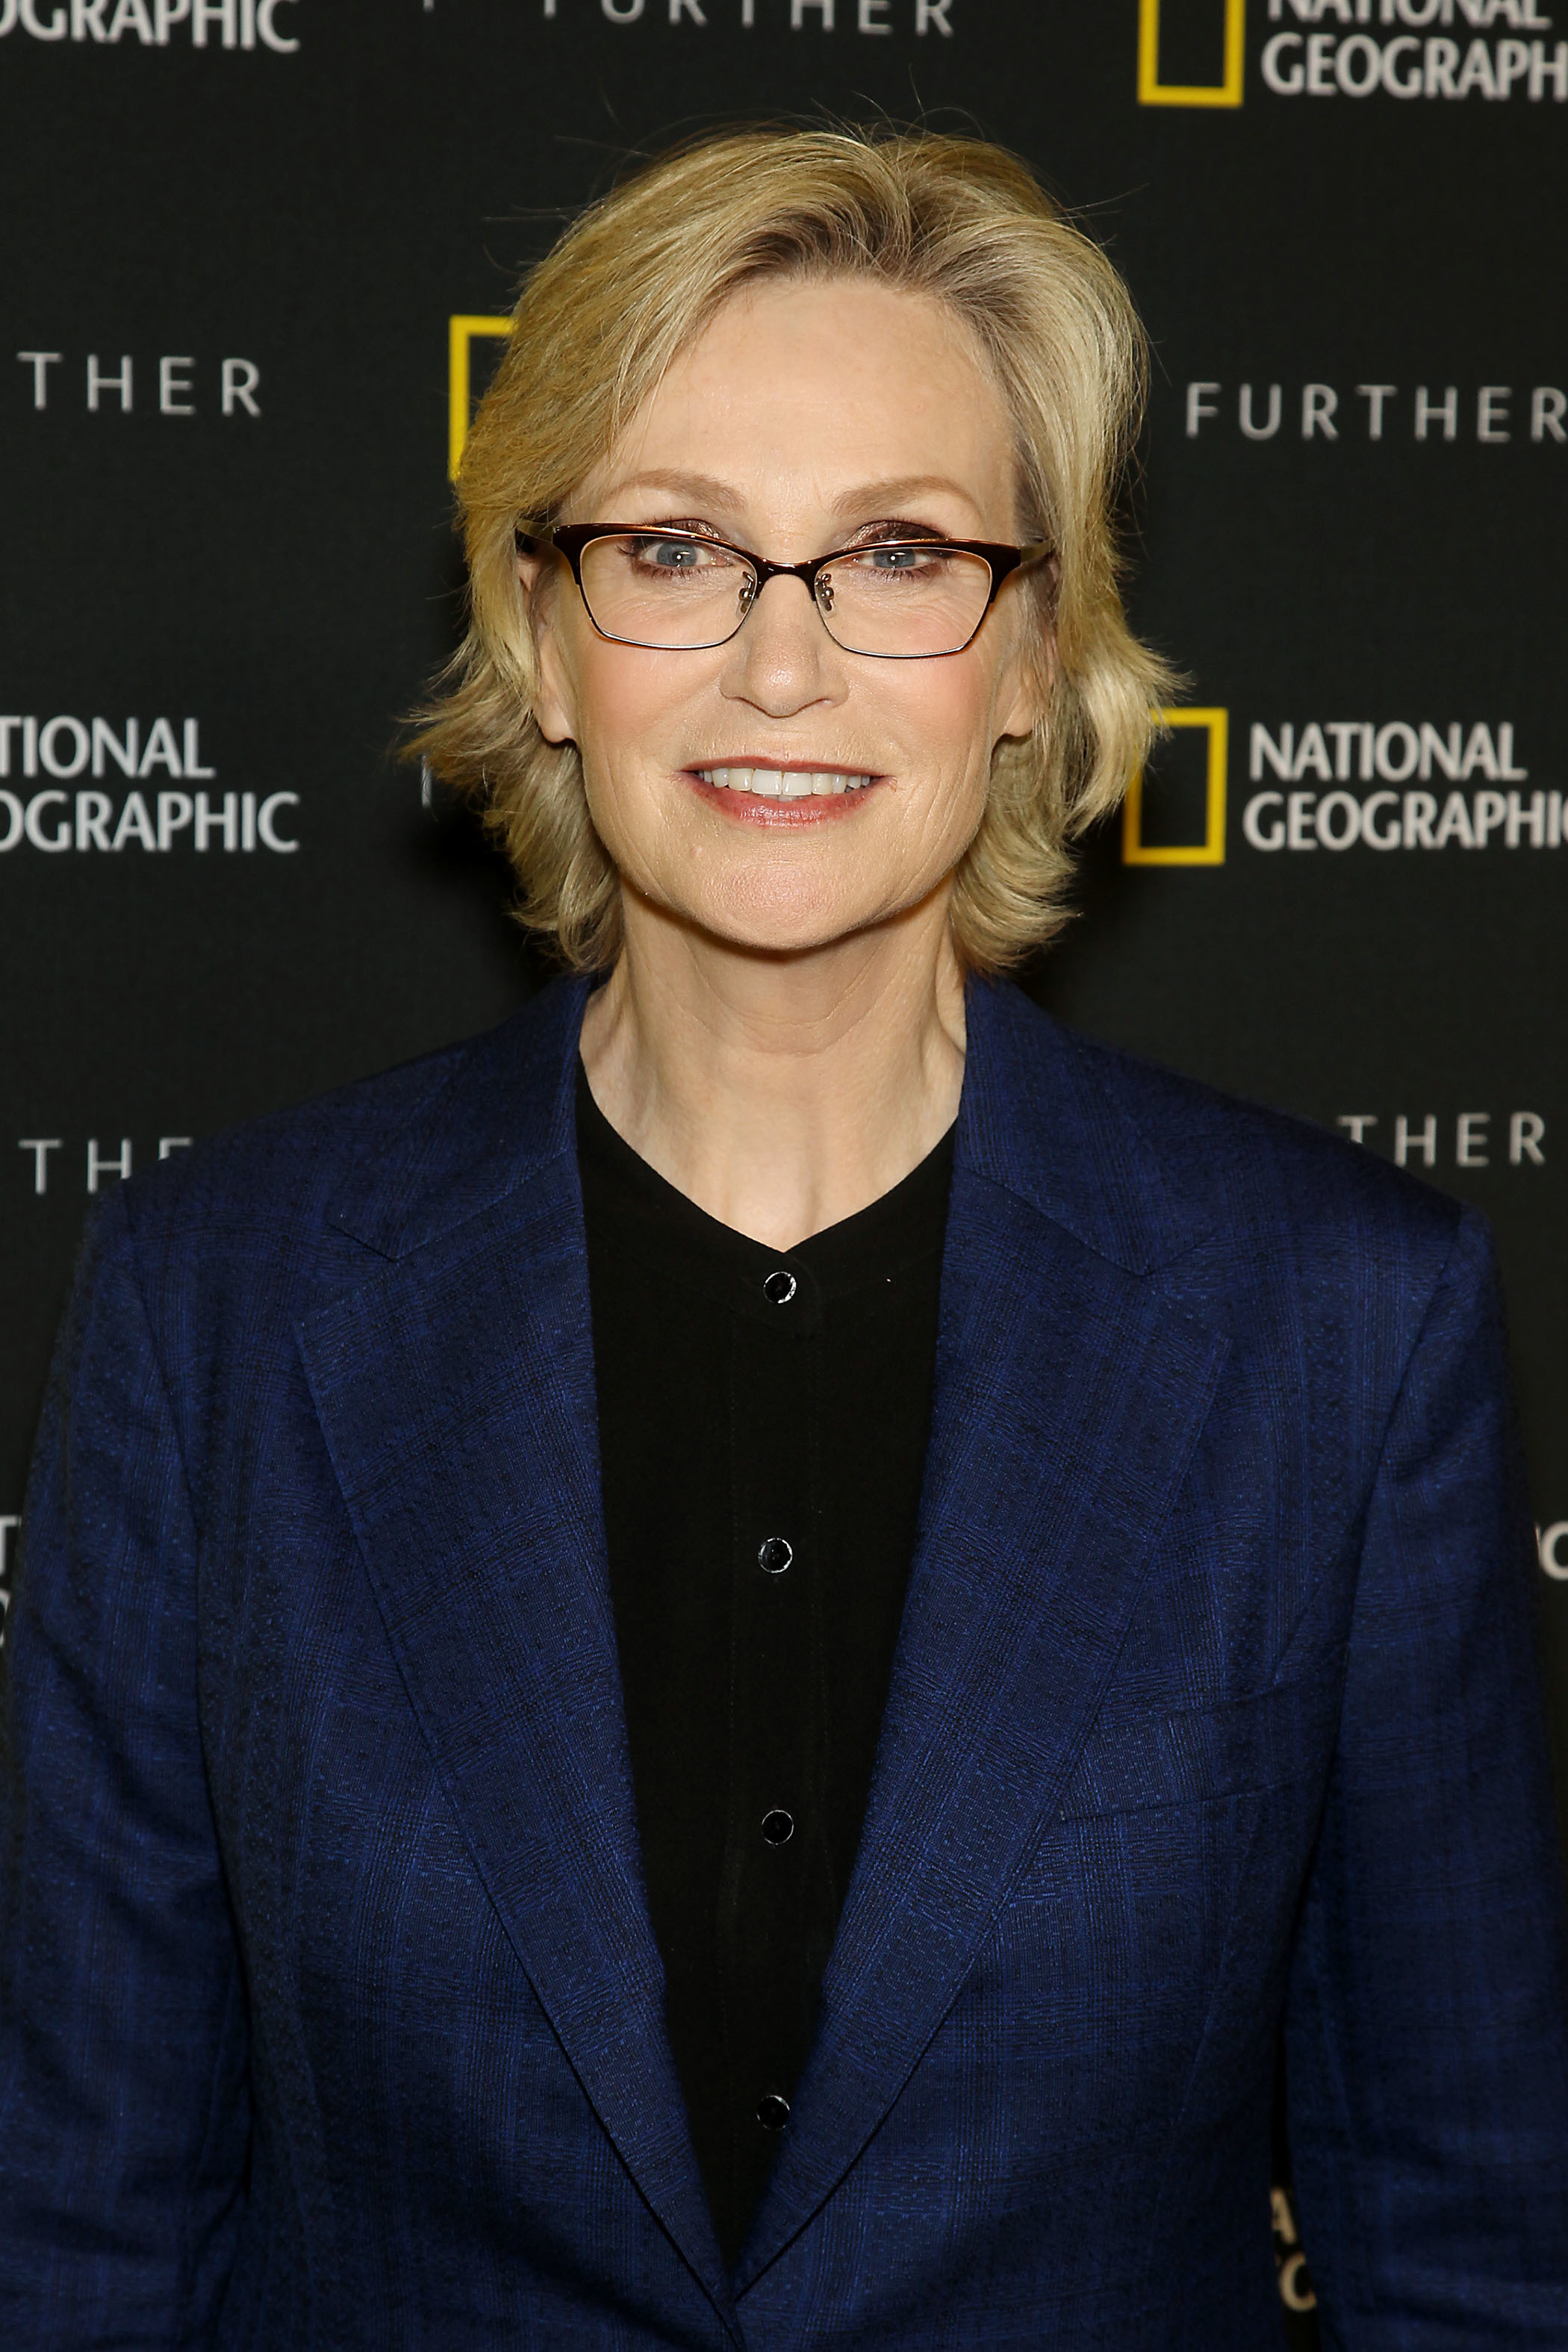 Jane Lynch to host NBC's 'Hollywood Game Night'